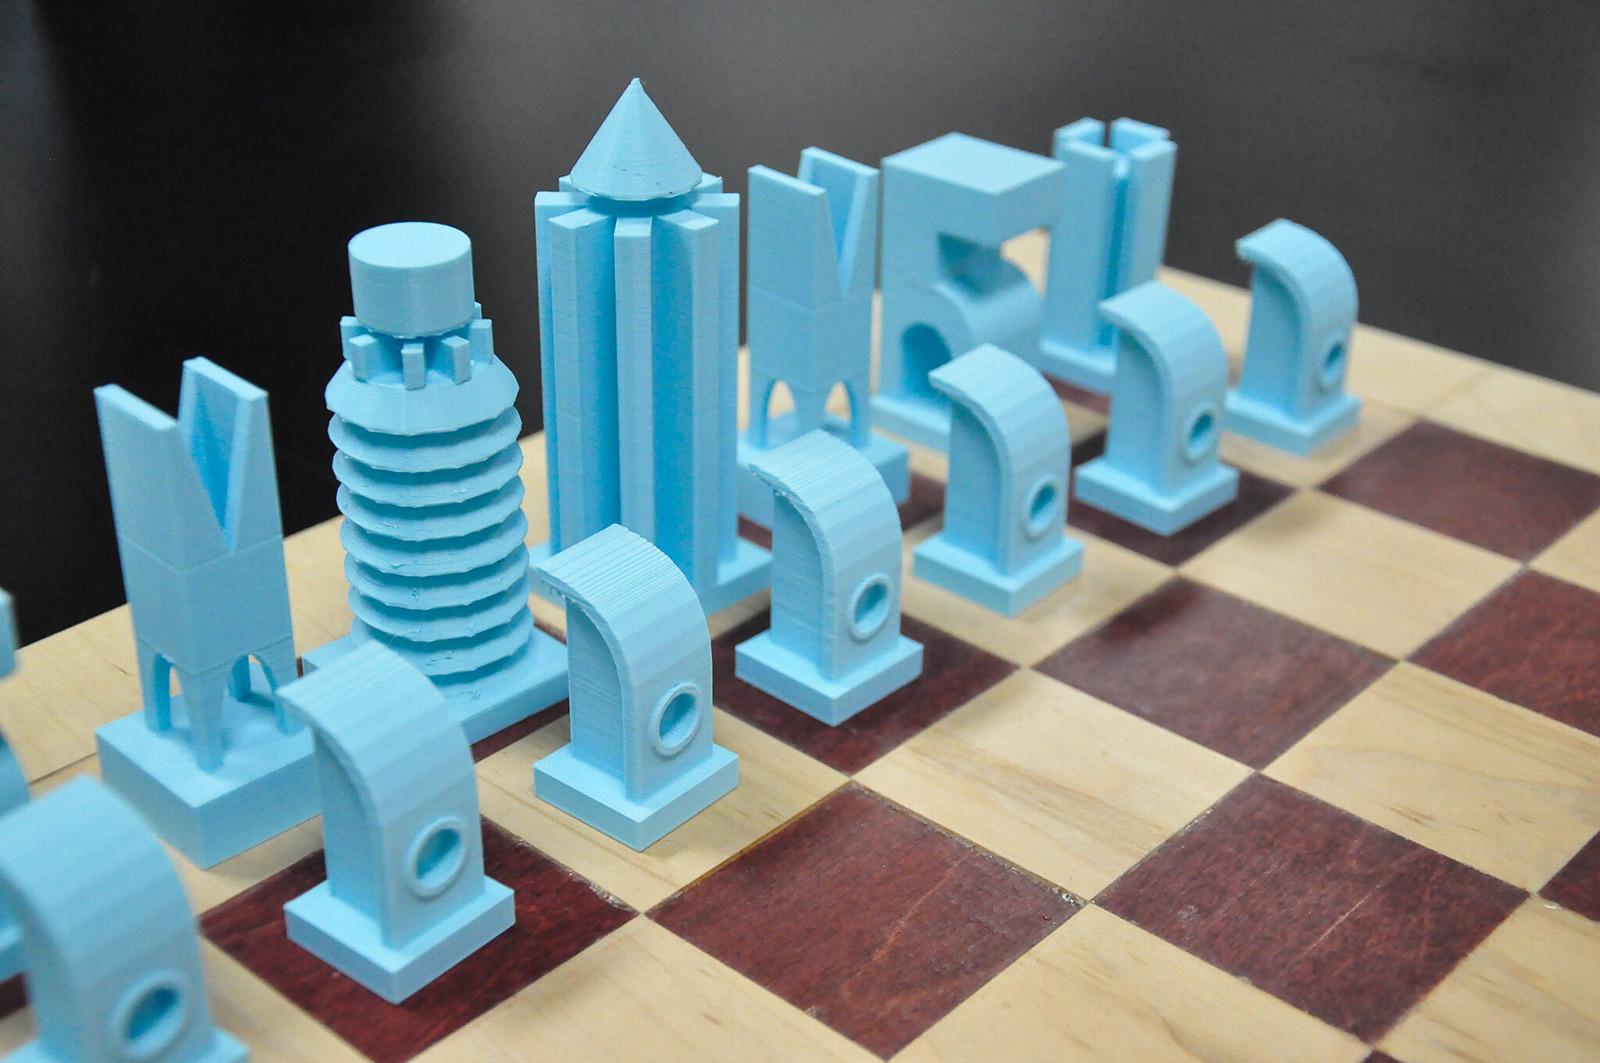 3D printed blue chessboard pieces in the shape of building